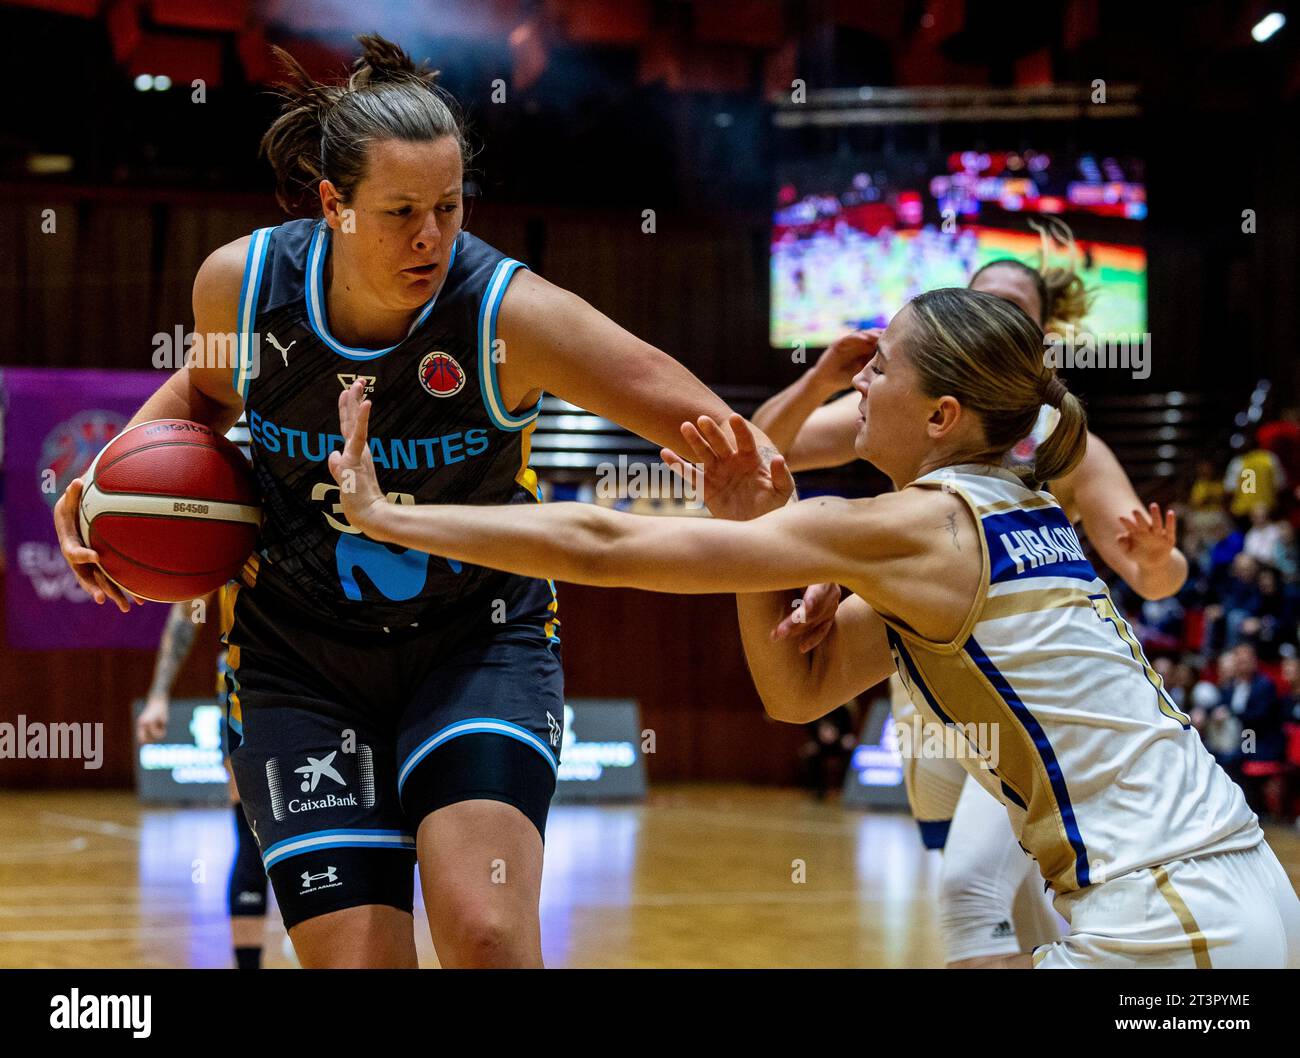 Chomutov, Czech Republic. 26th Oct, 2023. From left Billie Massey of Estudiantes and Jesika Hibalova of Chomutov in action during the Match of 3rd round of Group K of FIBA European Women's Basketball Cup in Chomutov, Czech Republic, October 26, 2023. Credit: Ondrej Hajek/CTK Photo/Alamy Live News Stock Photo